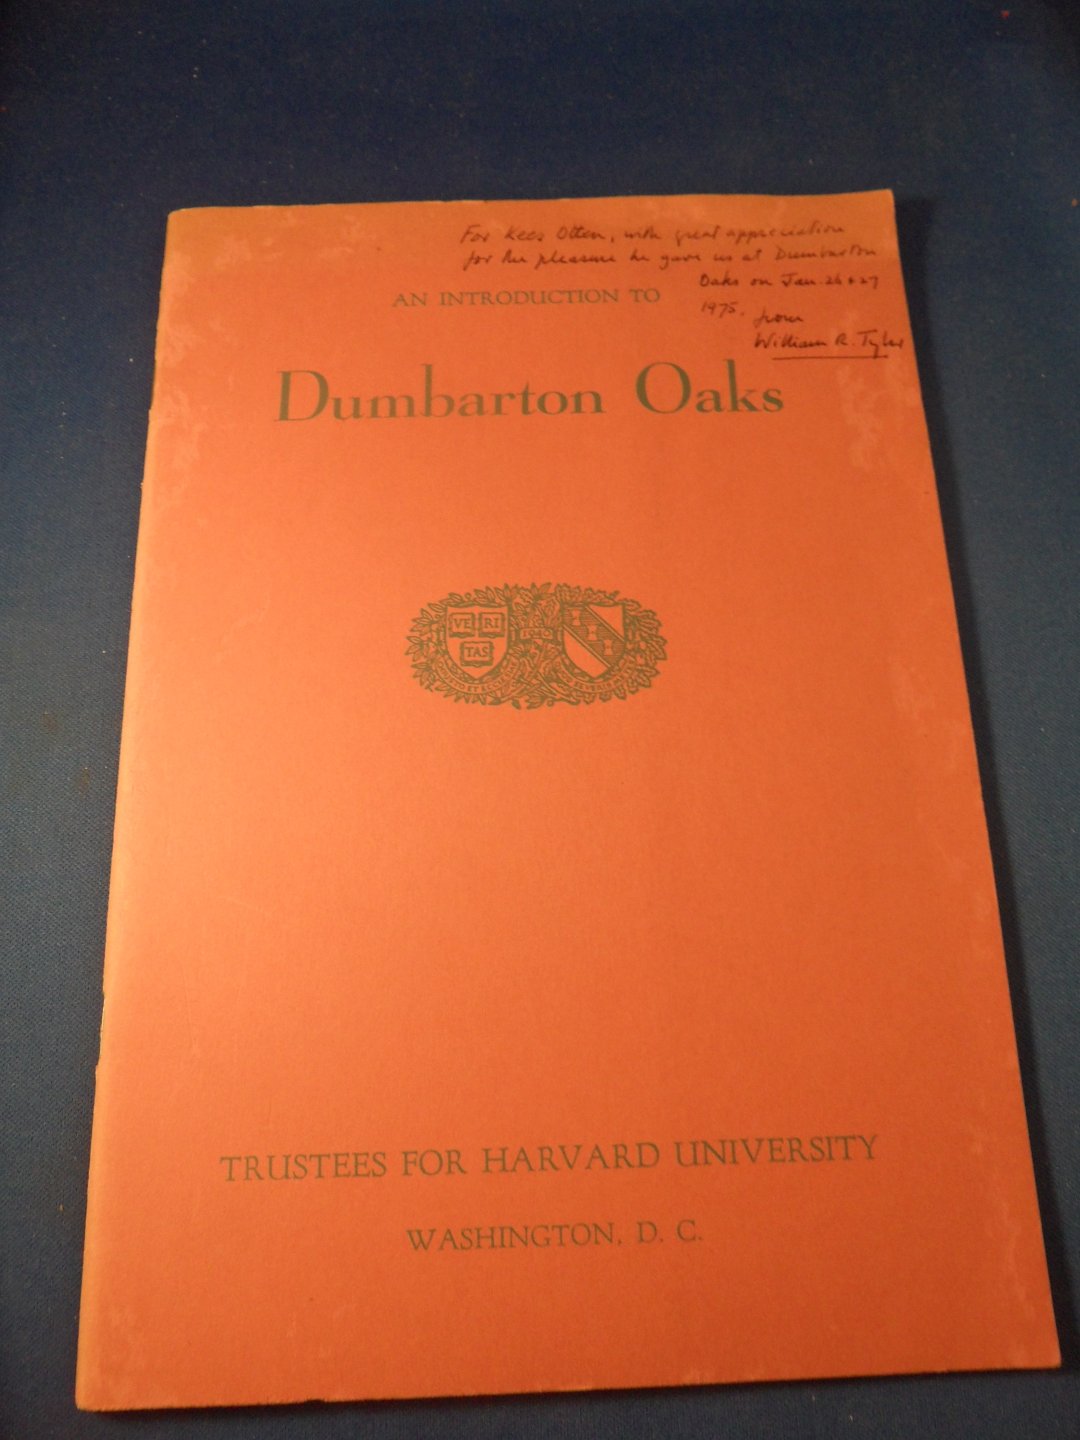 Tyler, William R. - An introduction to Dumbarton Oaks